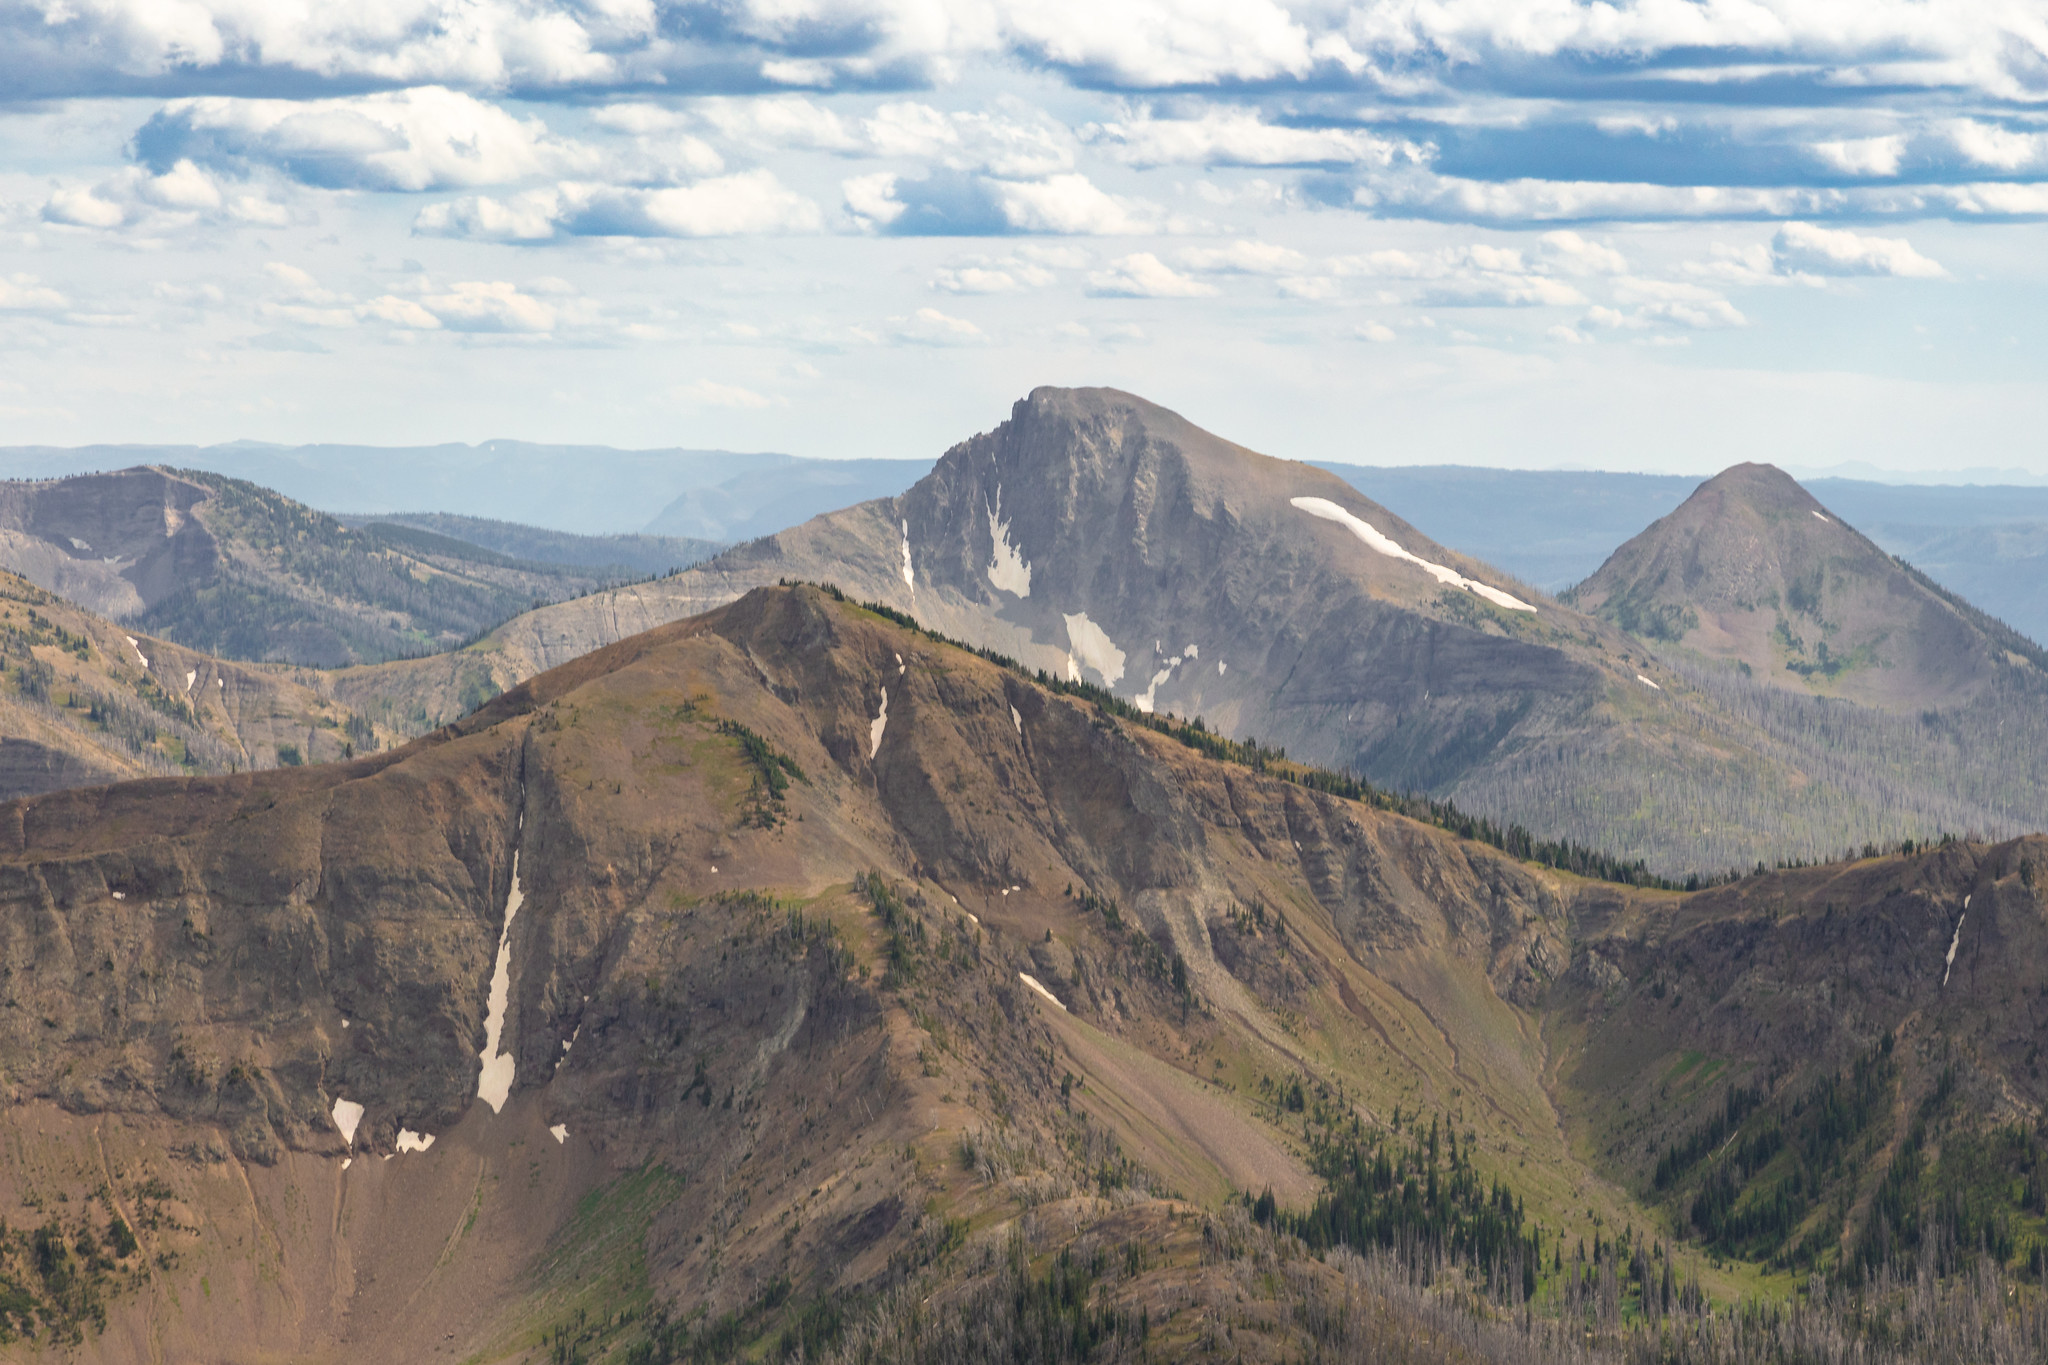 First Peoples Mountain (center) rises between Top Notch Peak (foreground) and Mt. Stevenson (back right) seen from Avalanche Peak NPS / Jacob W. Frank